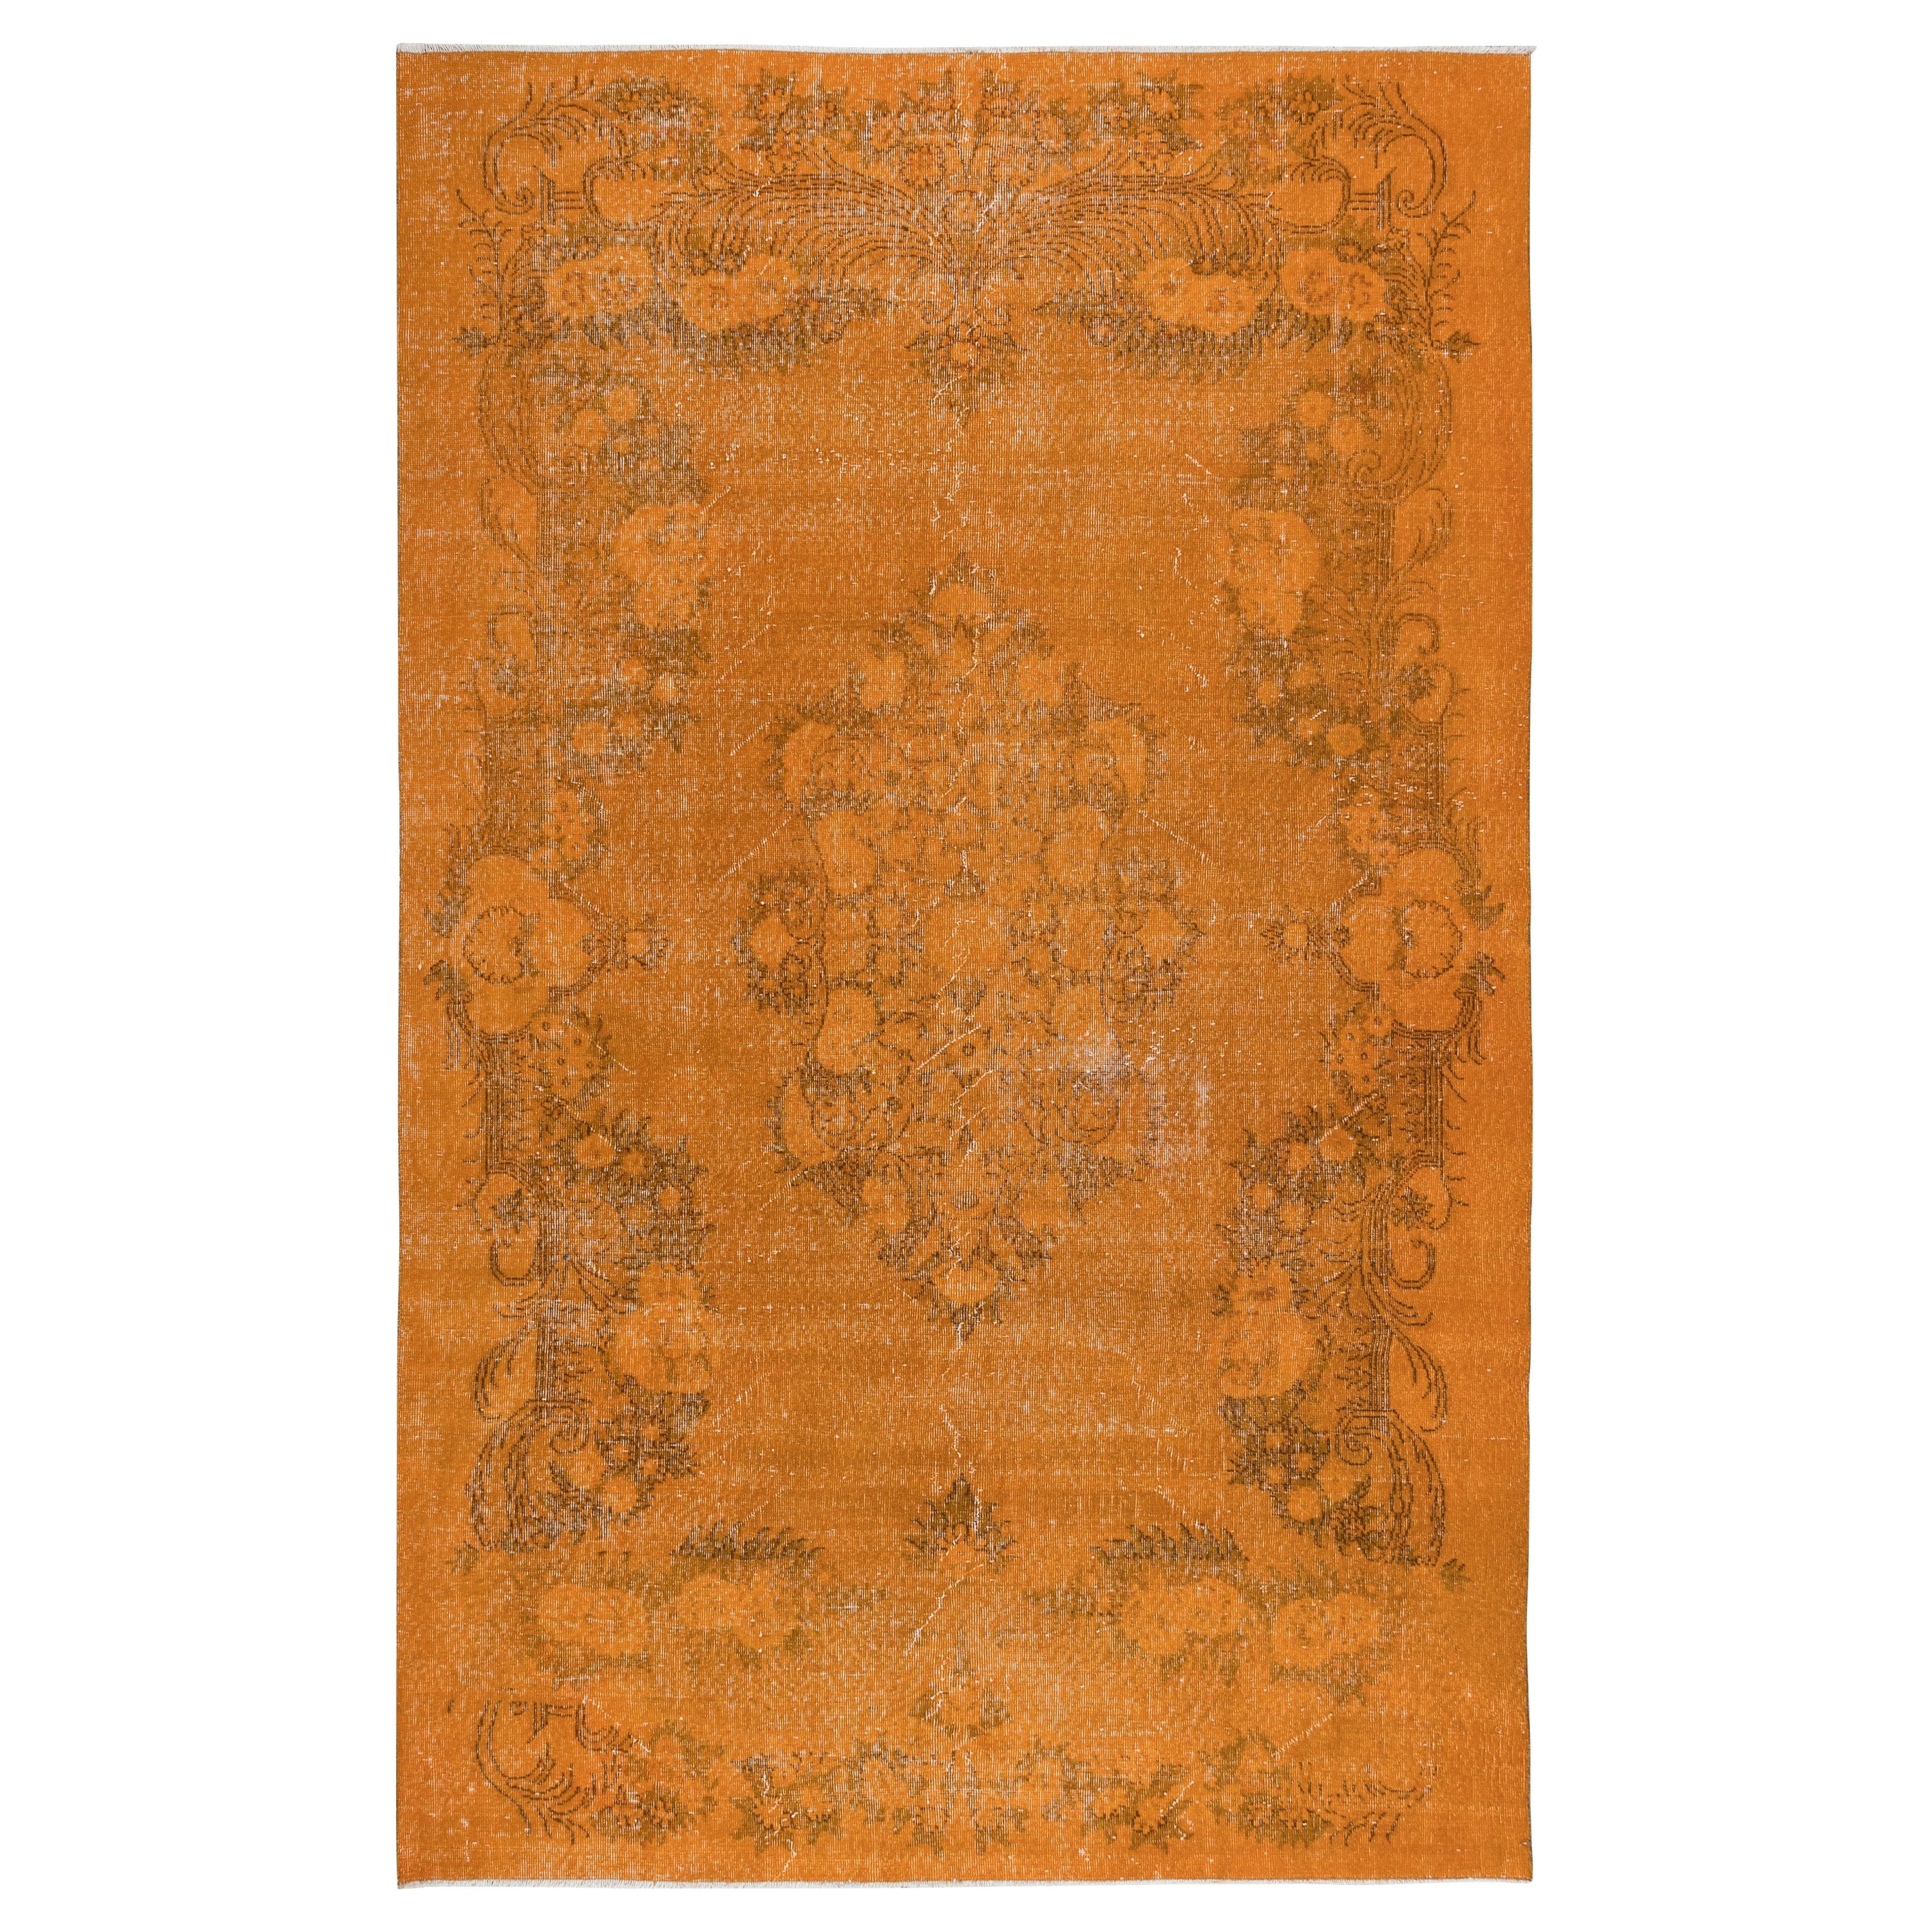 6.8x10.6 Ft One-of-a-kind Wool Area Rug in Orange, Handknotted in Turkey